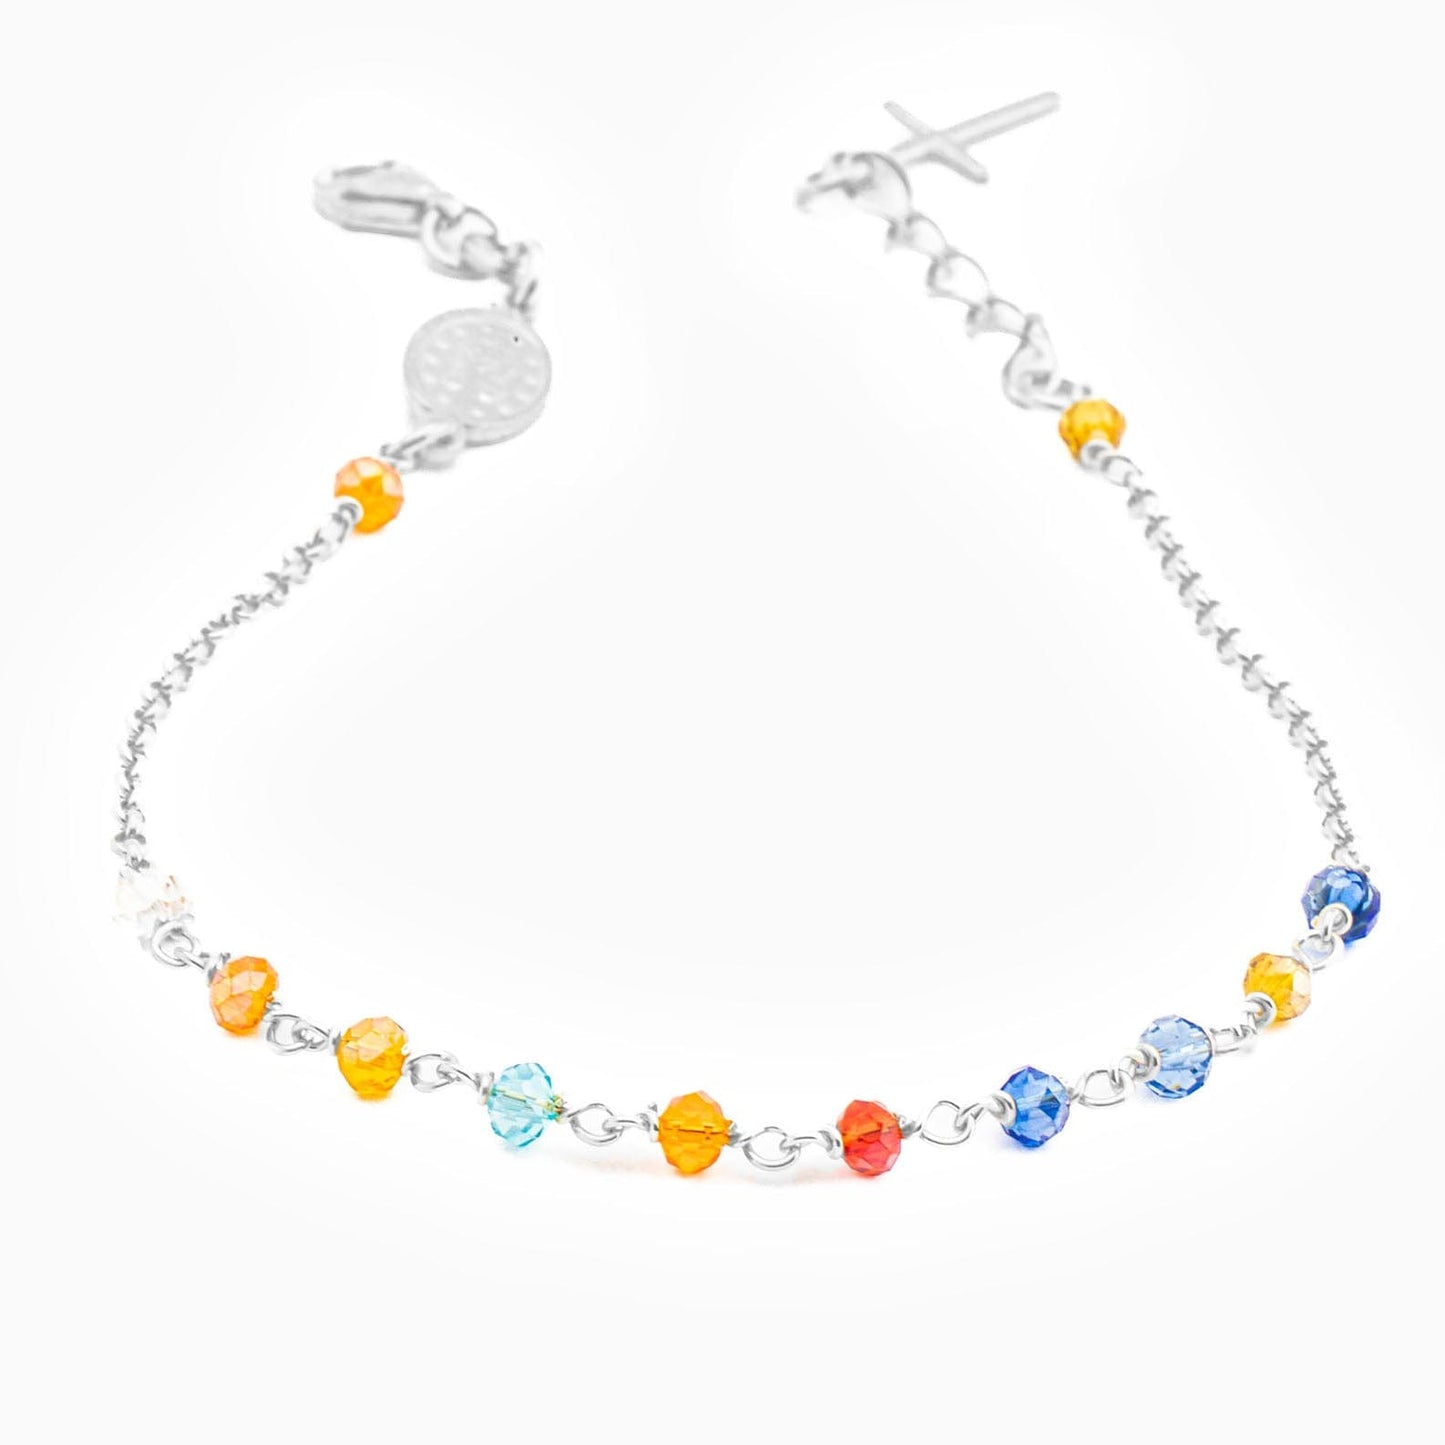 MONDO CATTOLICO Prayer Beads Rhodium e Multicolor Beads / Cm 17.5 (6.9 in) STERLING SILVER ROSARY BRACELET WITH MIRACULOUS MEDAL AND CROSS FACETED BEADS